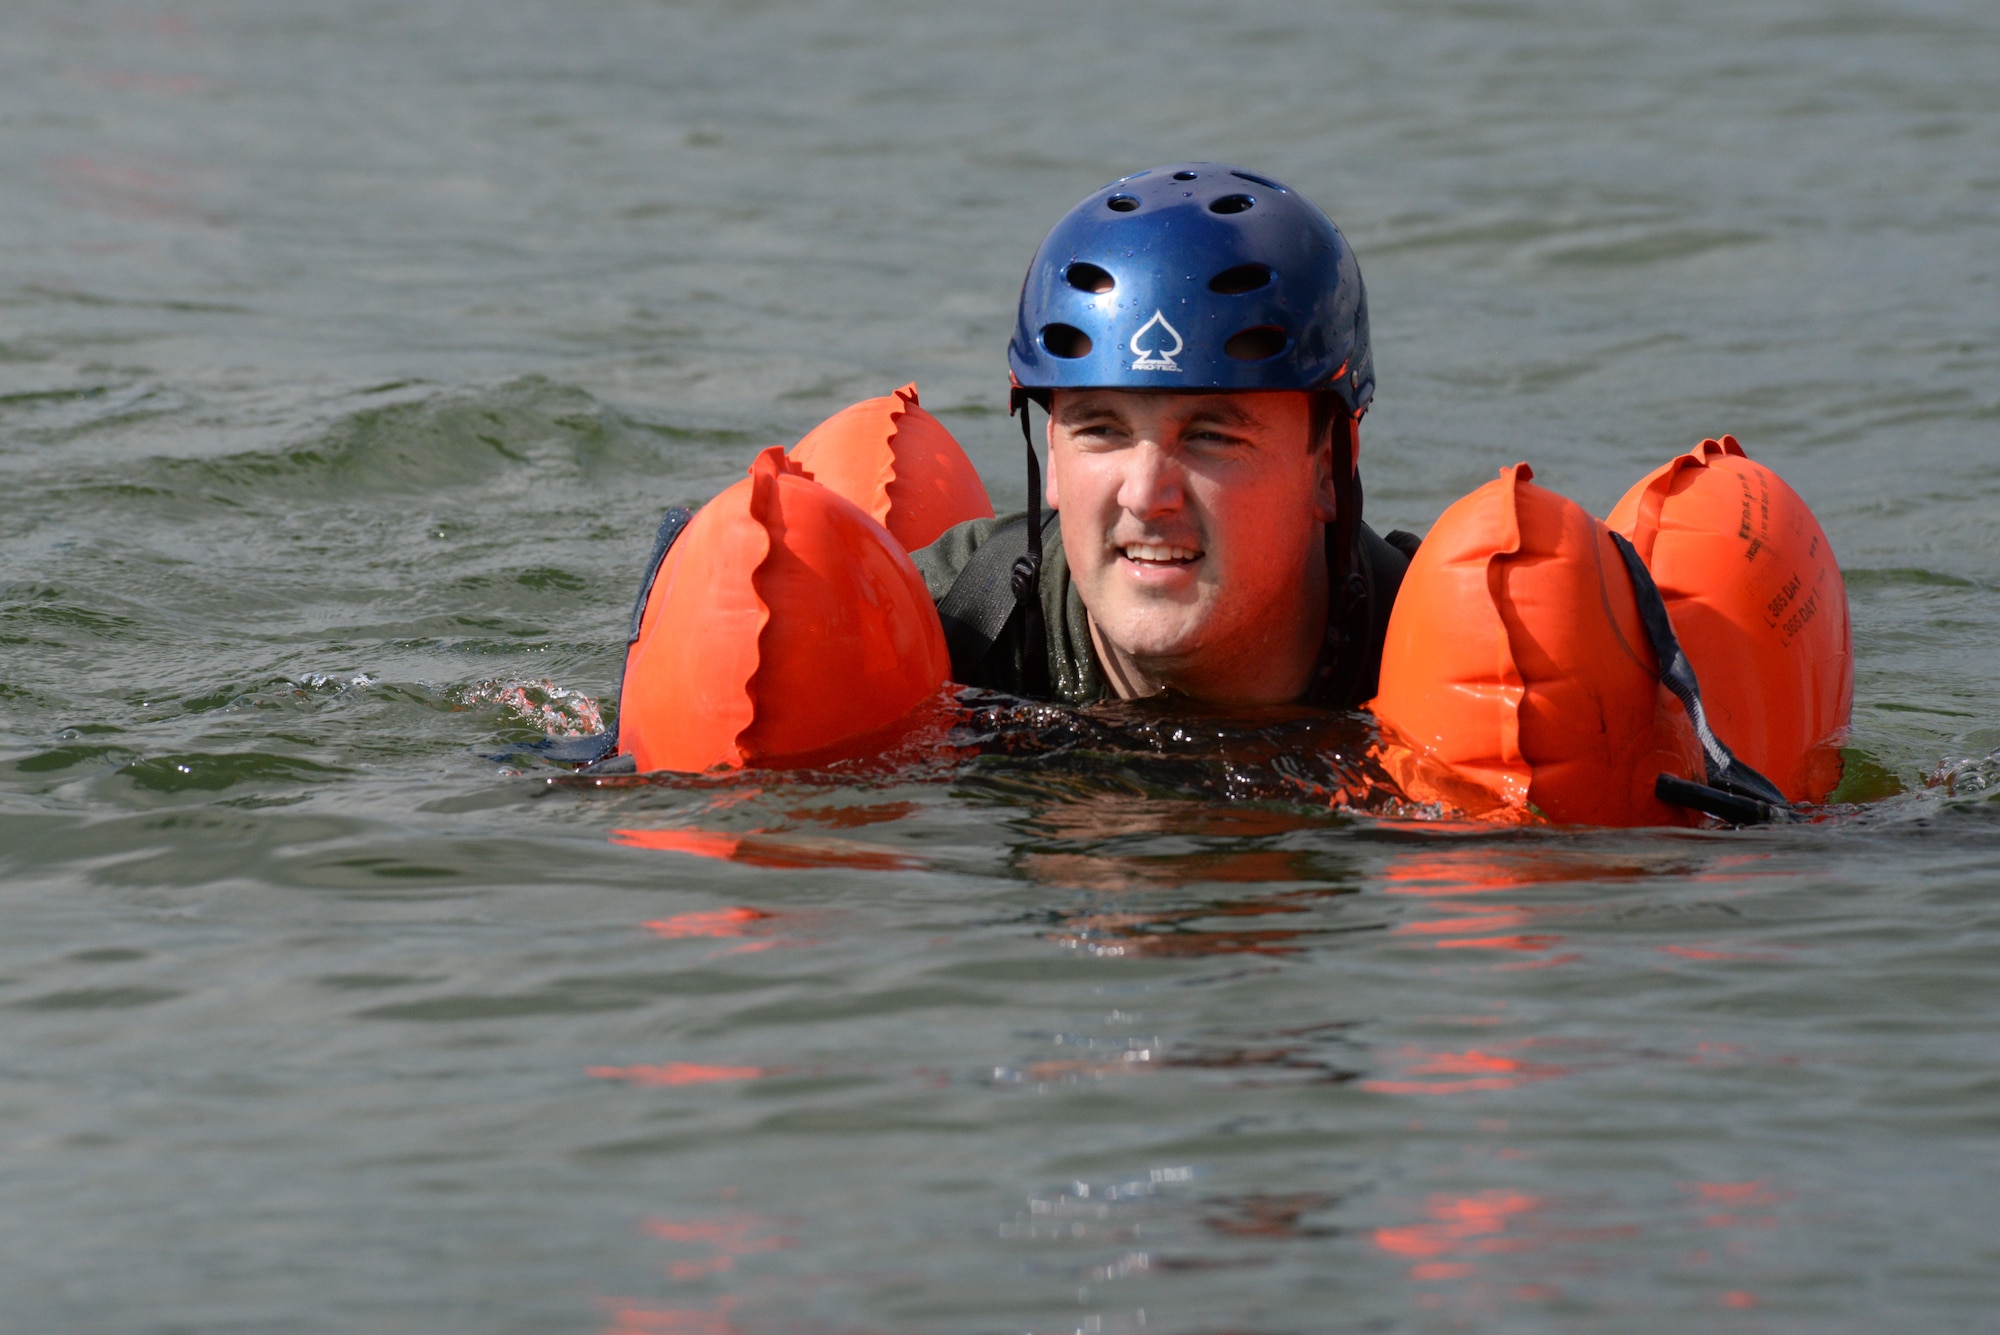 Maj. Bill Torson, member of the 170th Group assigned to Offutt Air Force Base, Nebraska, swims to shore after participating in water survival and rescue training July 14, 2018 during monthly inactive duty training. The hands-on water instruction included donning cold-water exposure suits; inflating and swimming with inflatable life preservers; and boarding and utilizing a 20-person survival raft.